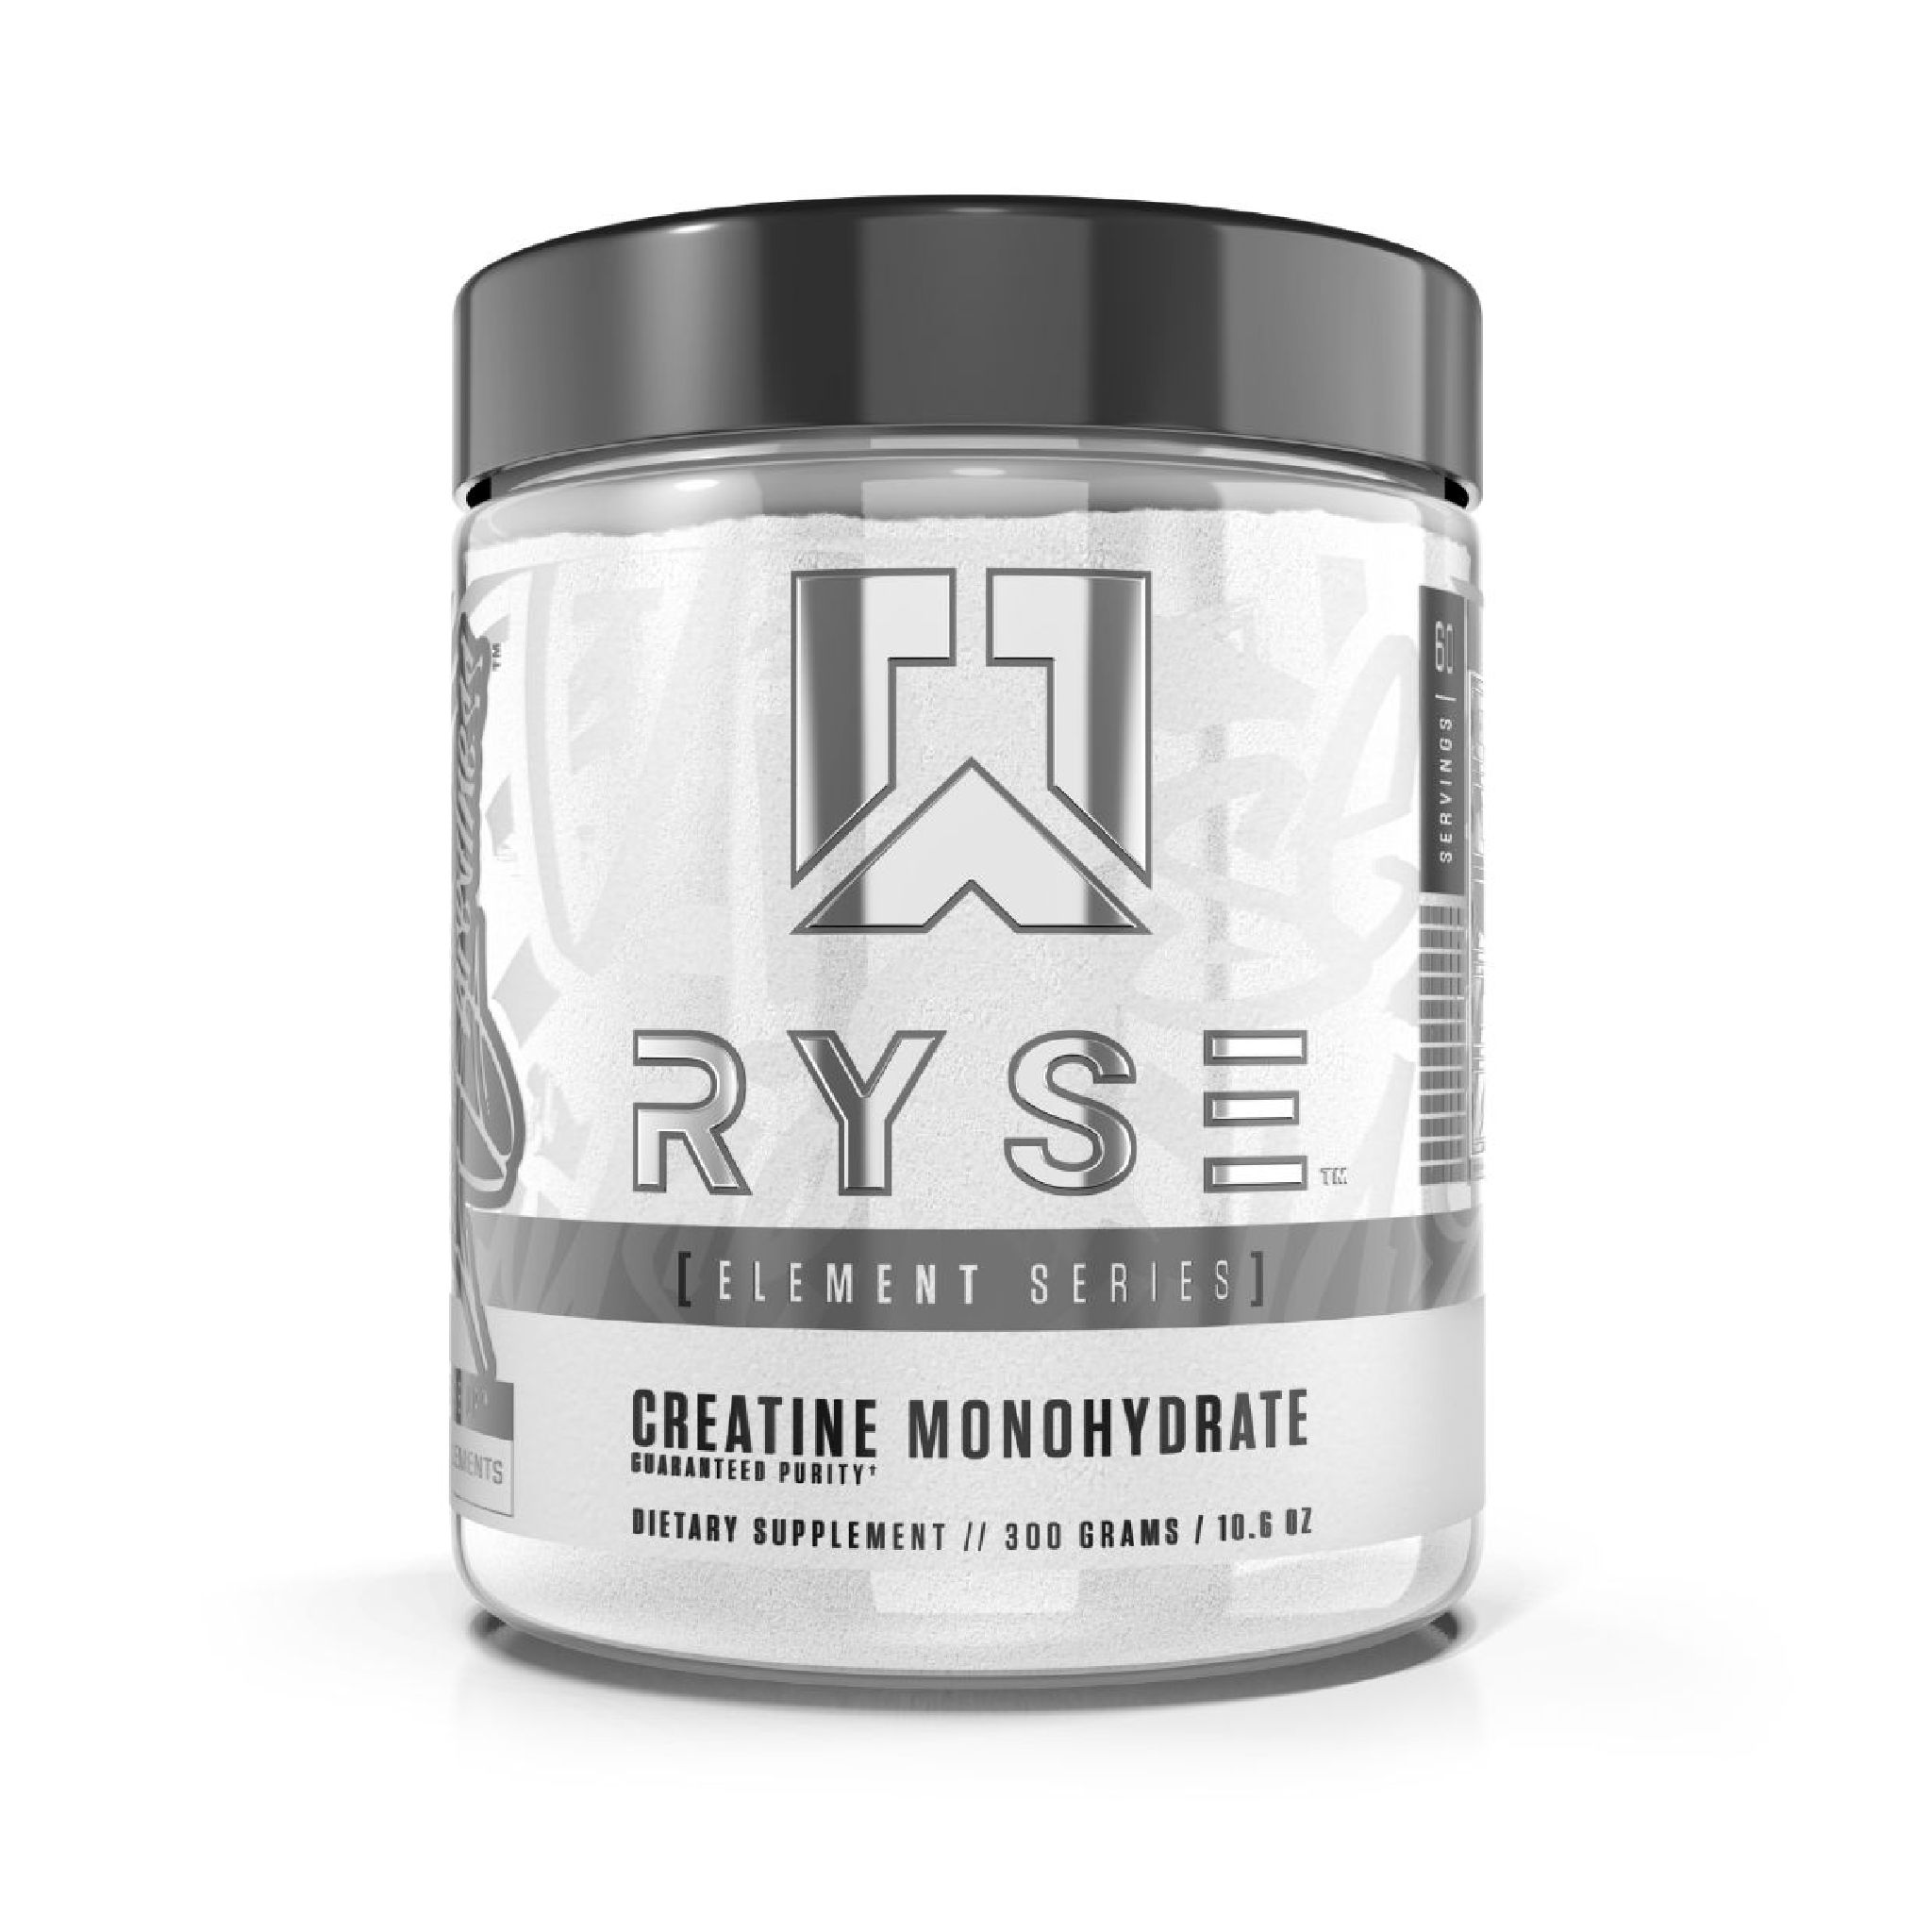 Ryse Creatine Monohydrate ( Unflavored / 60 Servings )